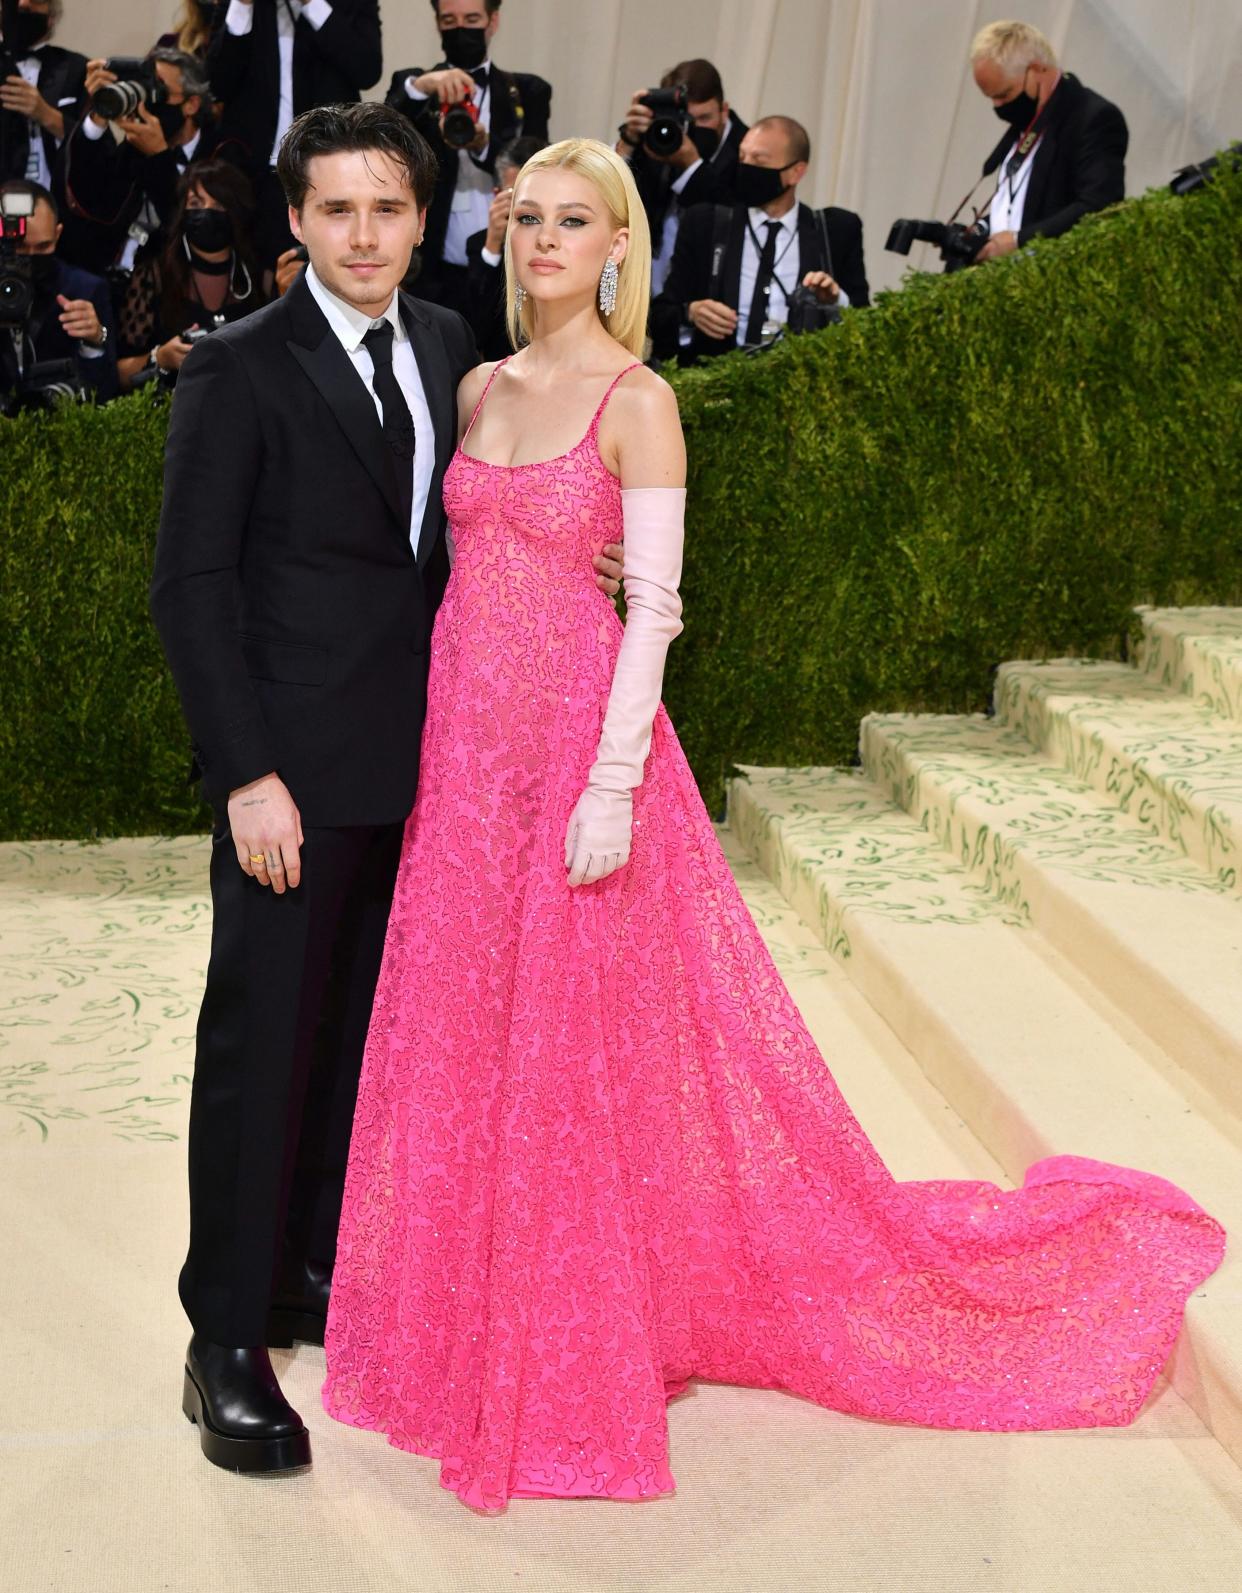 Brooklyn Beckham and Nicola Peltz arrive for the 2021 Met Gala at the Metropolitan Museum of Art on Sept. 13, 2021 in New York.